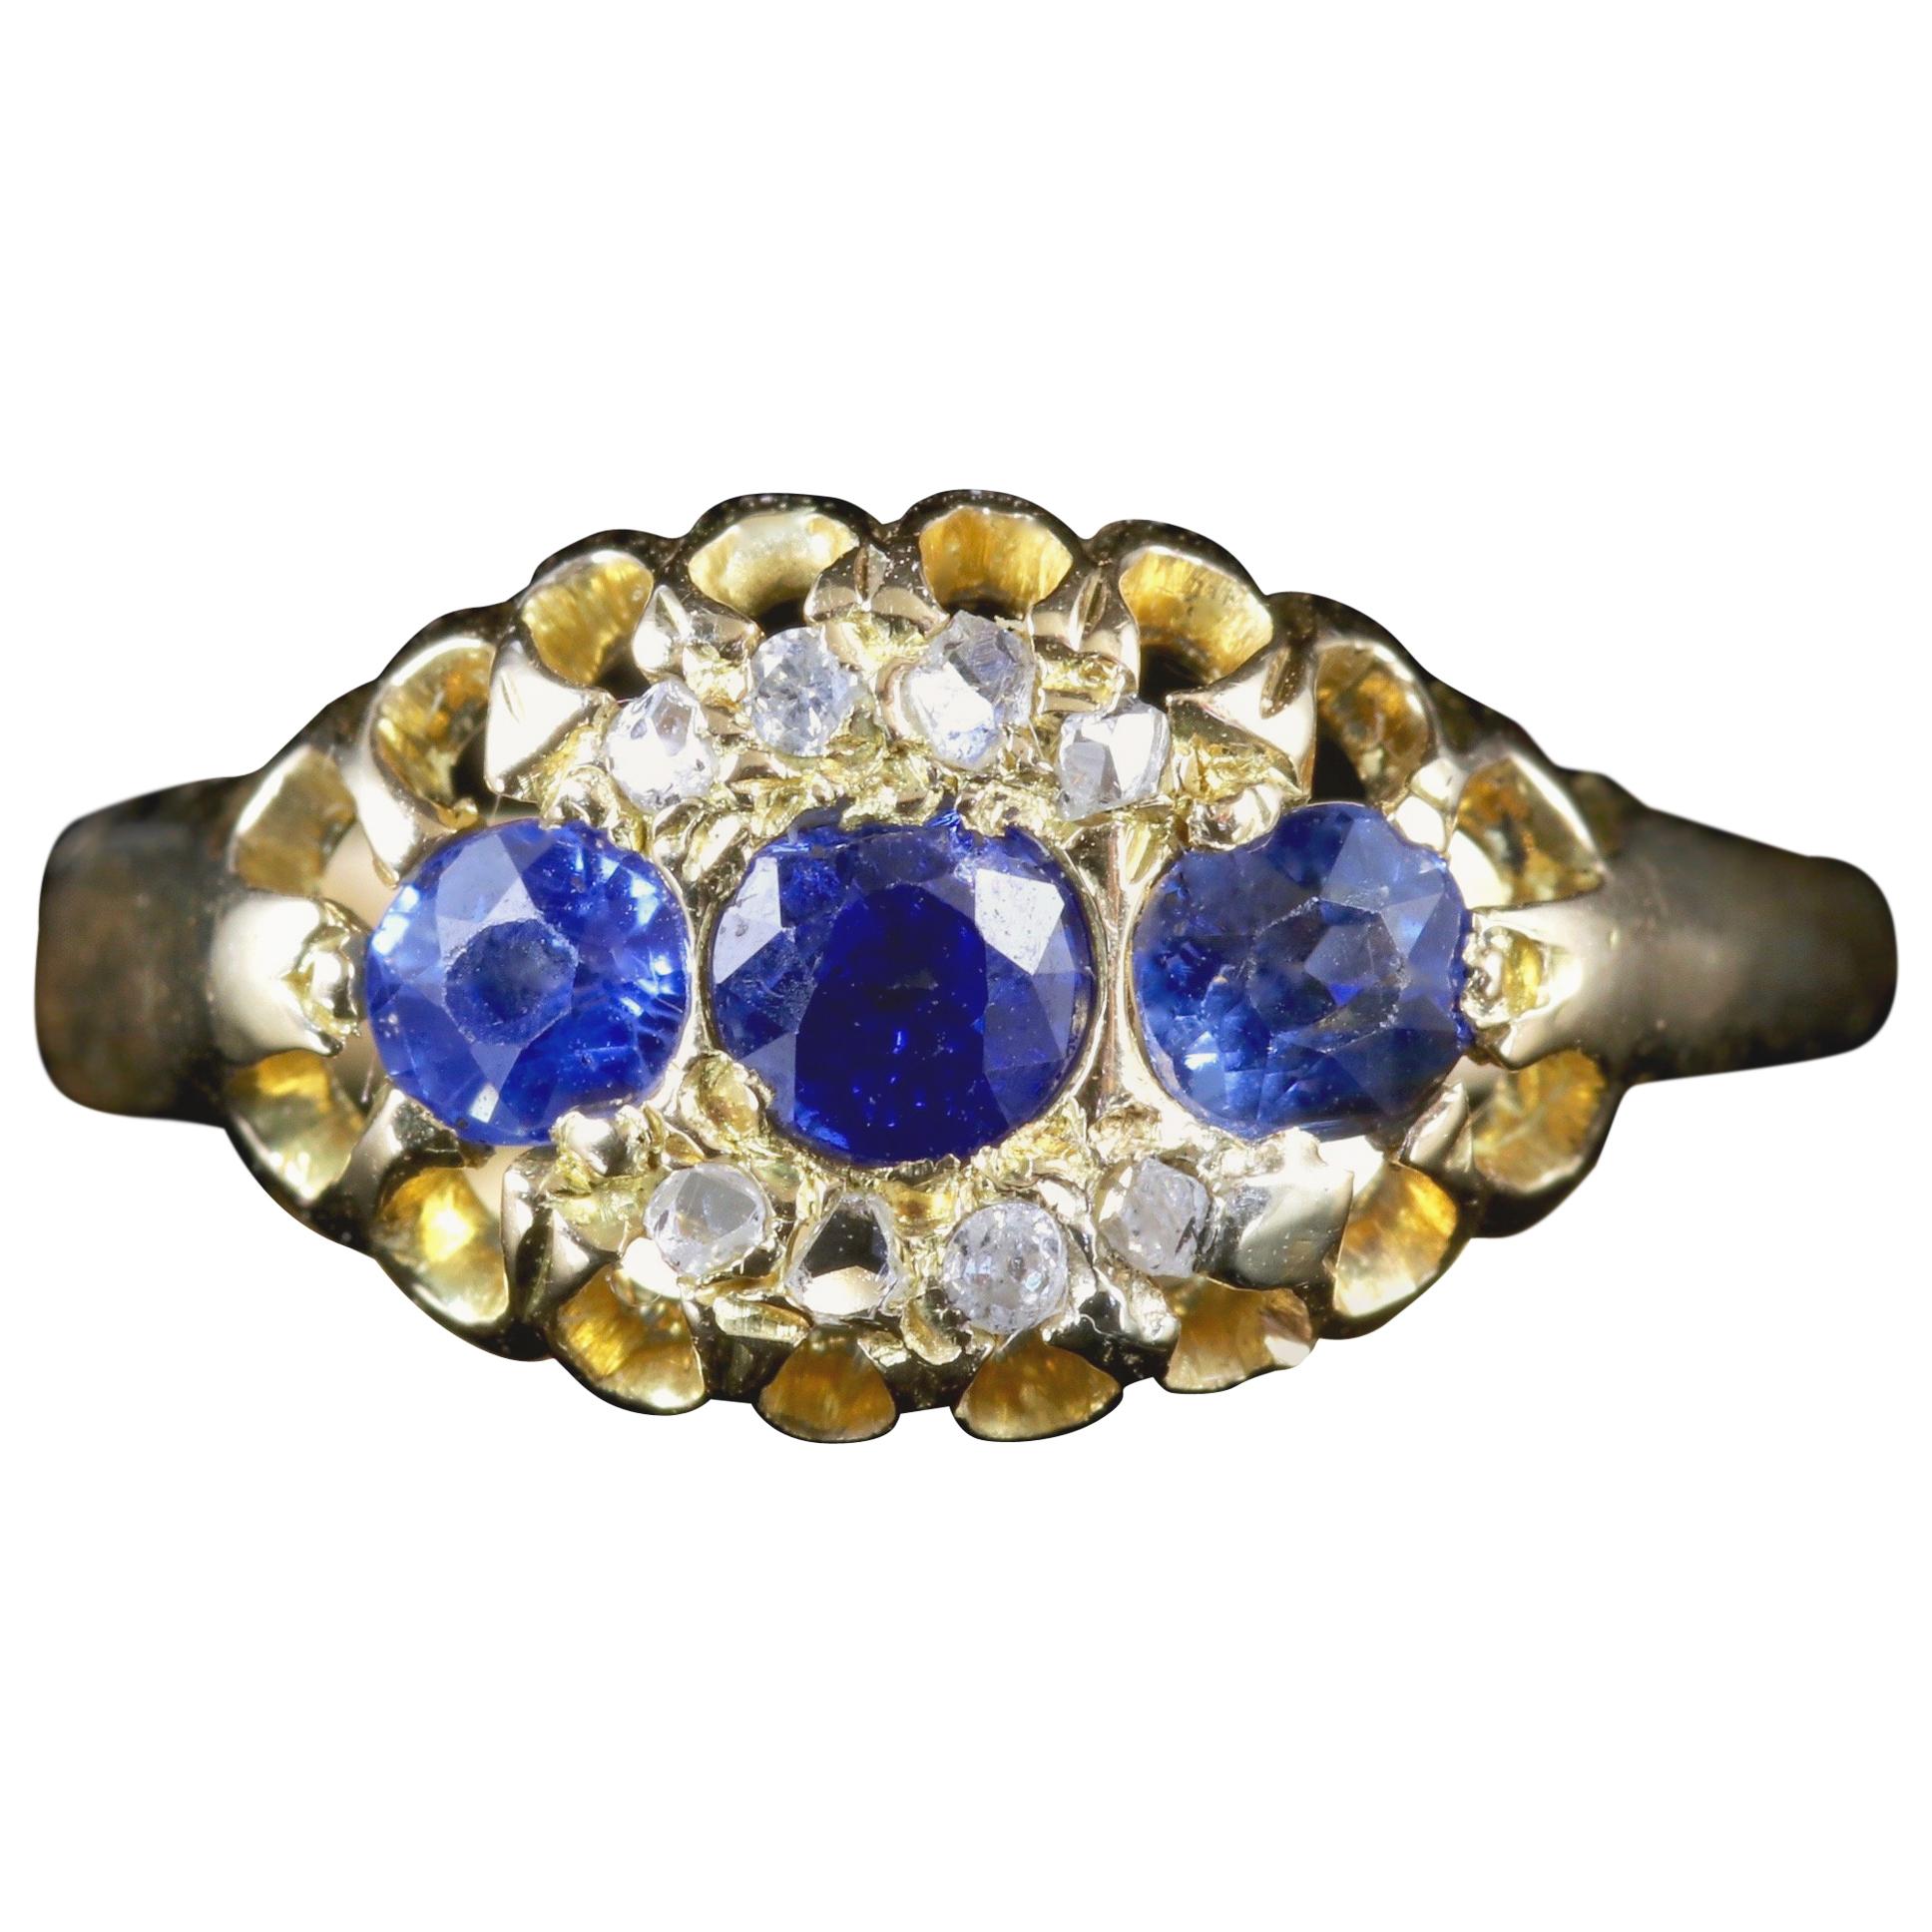 Antique Edwardian Sapphire Diamond Ring 18 Carat Dated Chester, 1903 For Sale